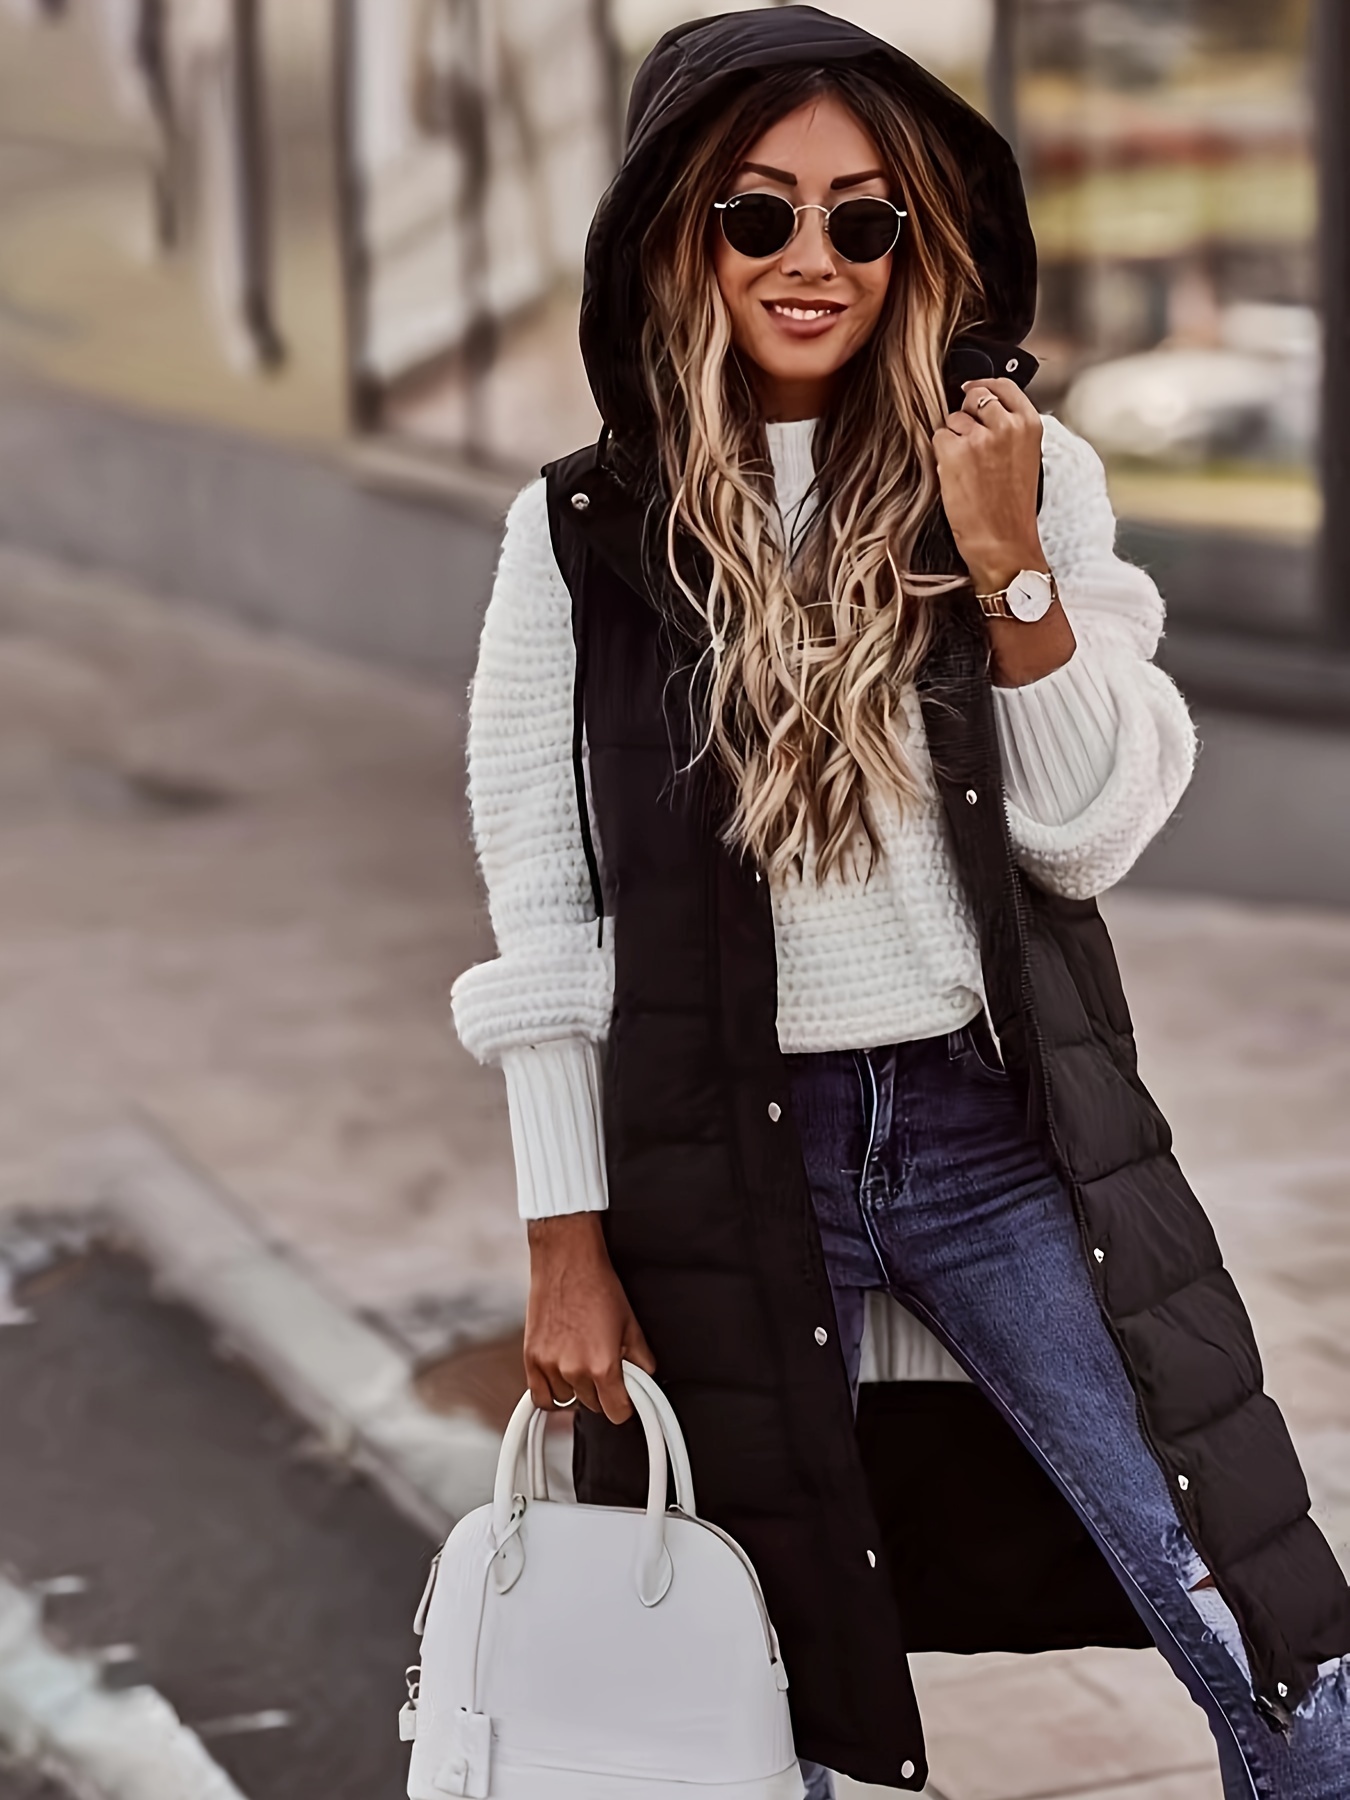 Women's Vest Long Cardigan Casual Simple Comfortable Sleeveless Jacket  Street Style Fashion Coat Chalecos Mujer Invierno